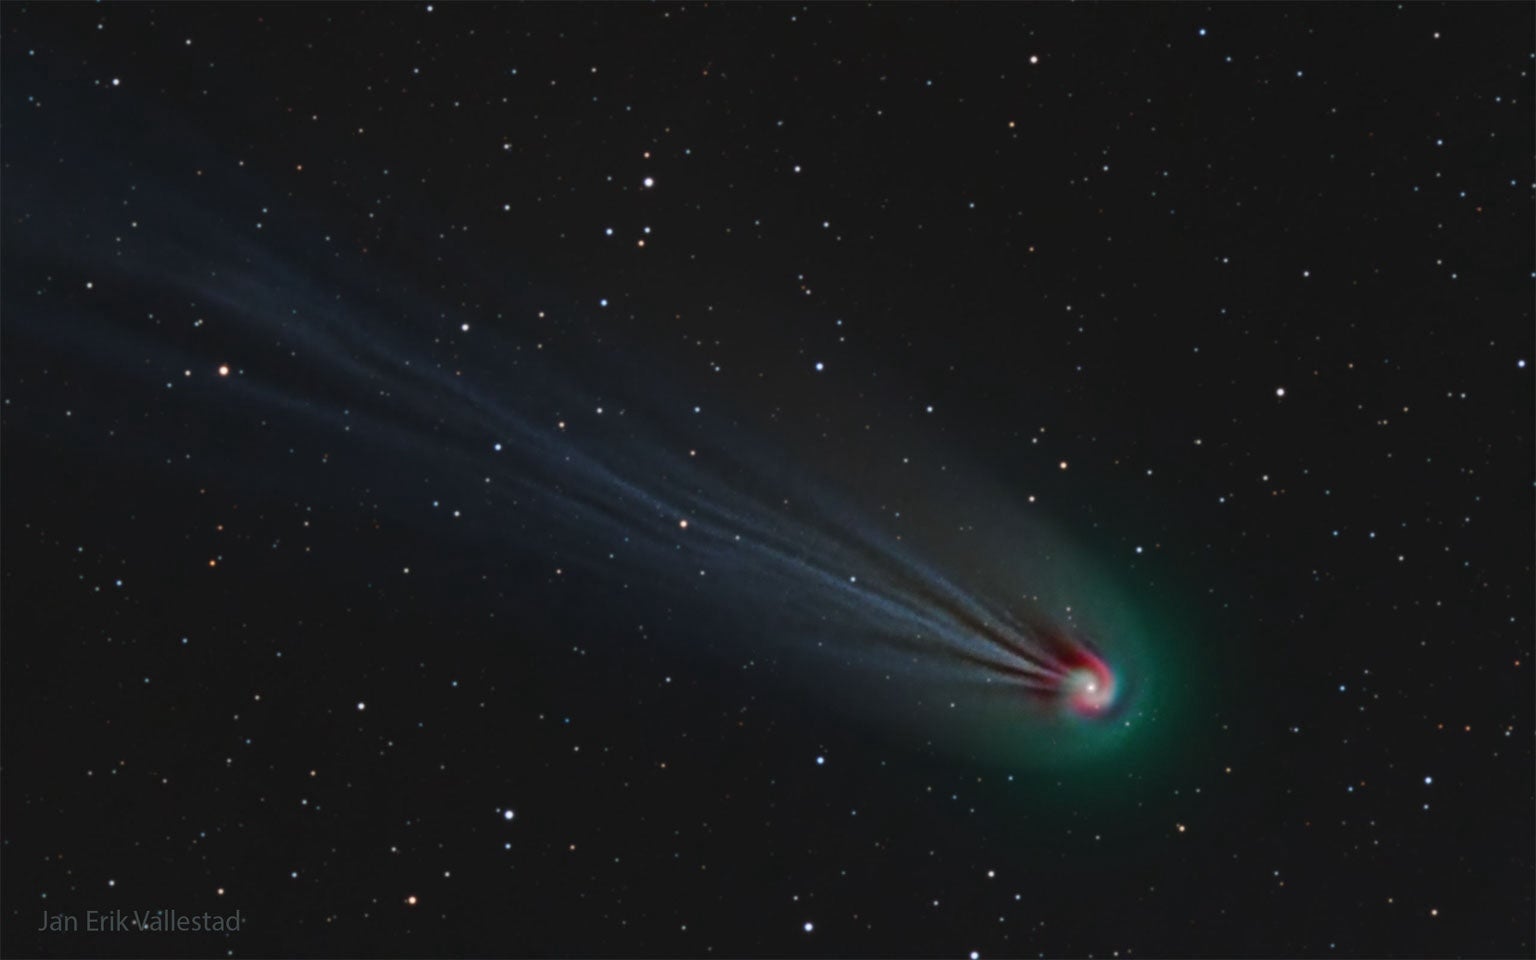 Comet 12P/Pons-Brooks in the night sky. Green glowing gas swirls around a white center and red glowing gas encircles the green.